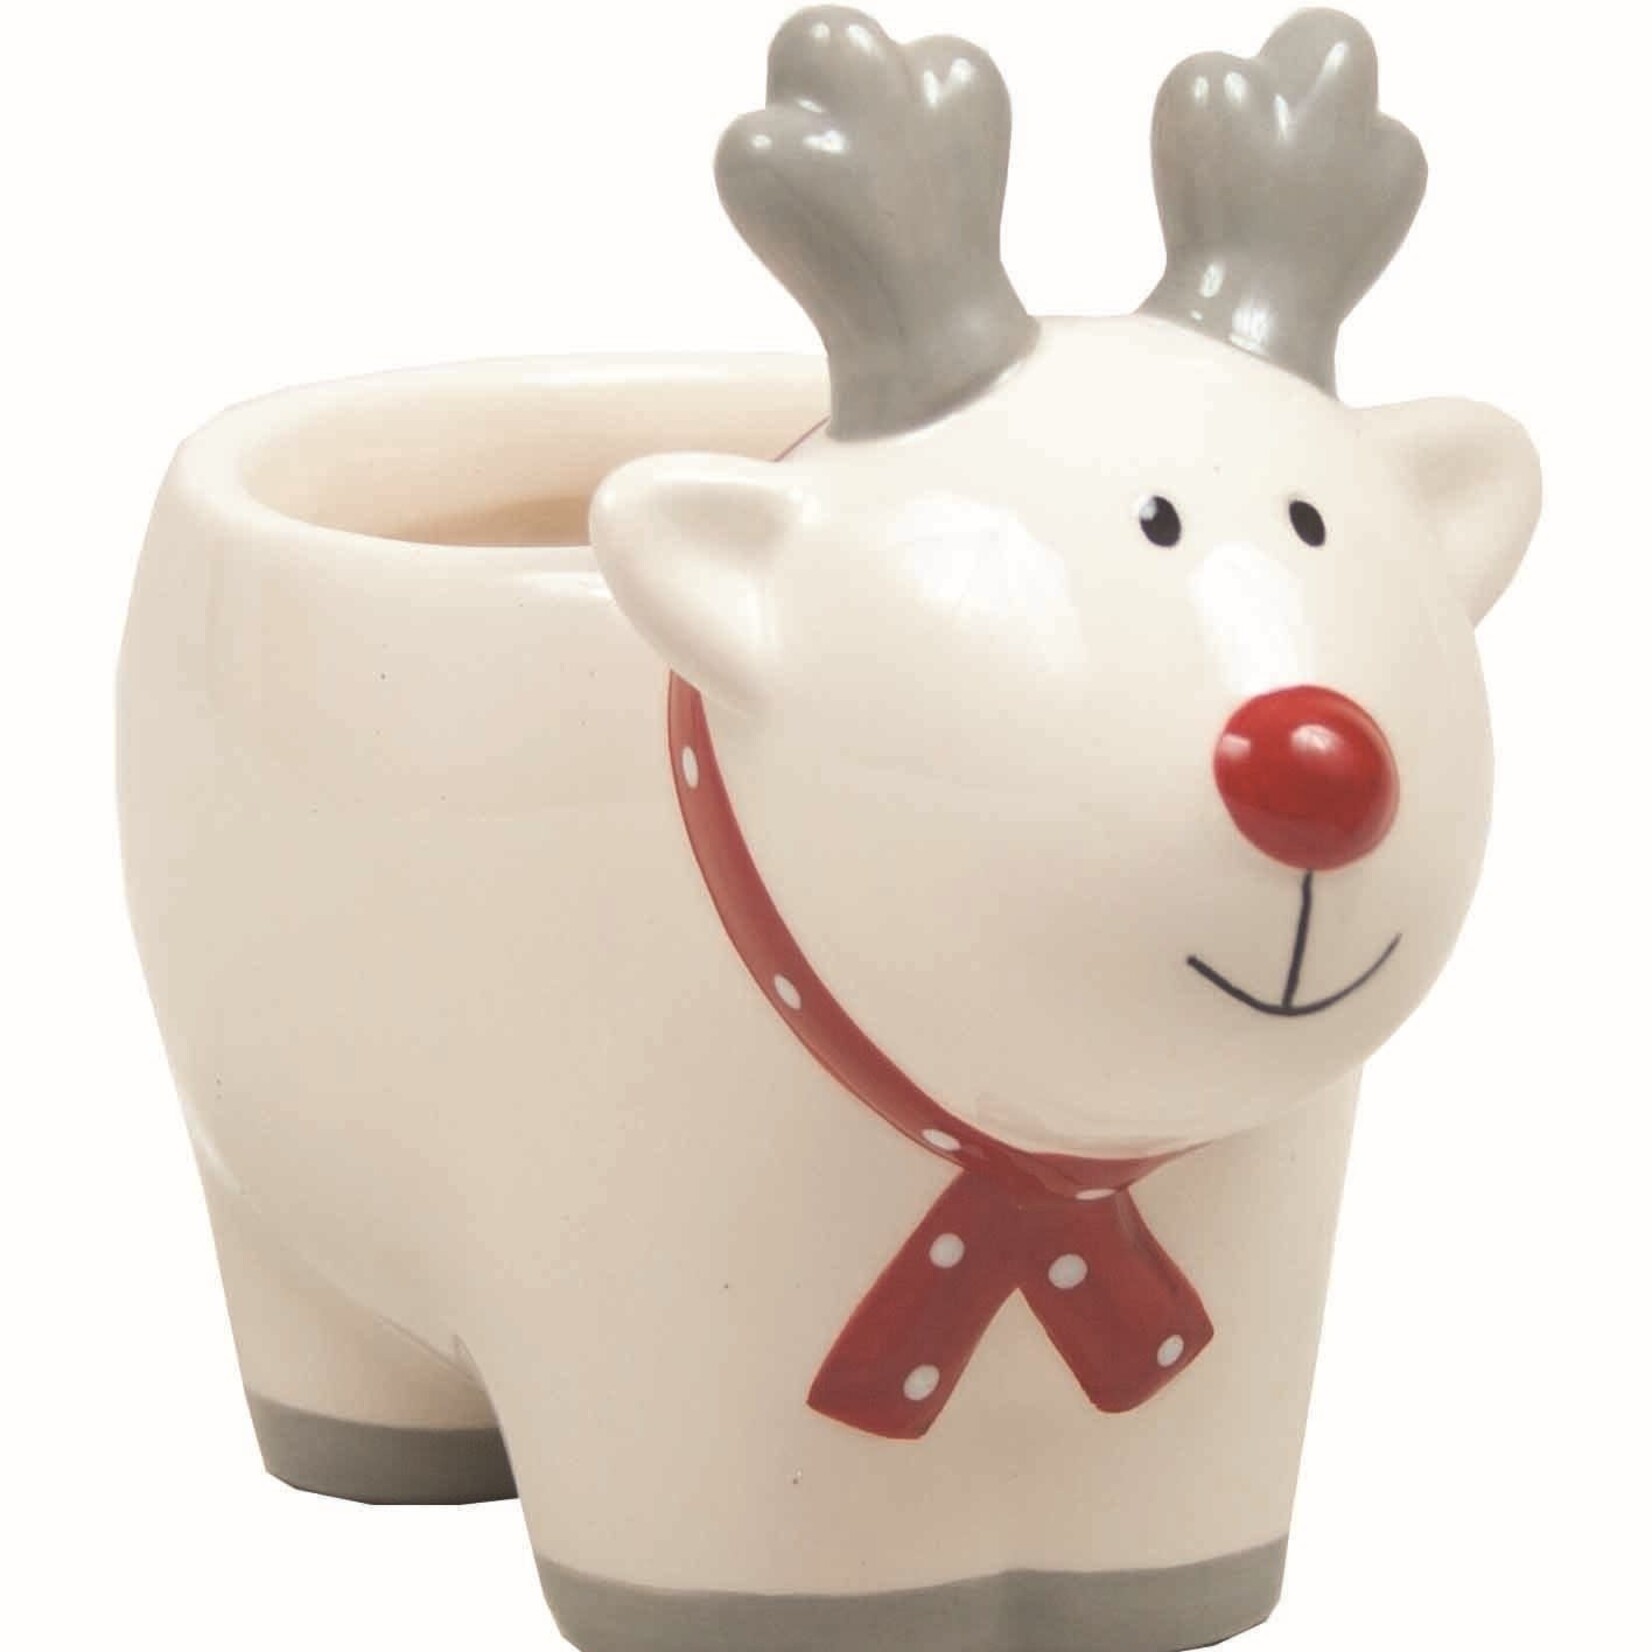 5.11X3.54X4.68" REINDEER NOVELTY DOLOMITE CONTAINER (3" OPENING)